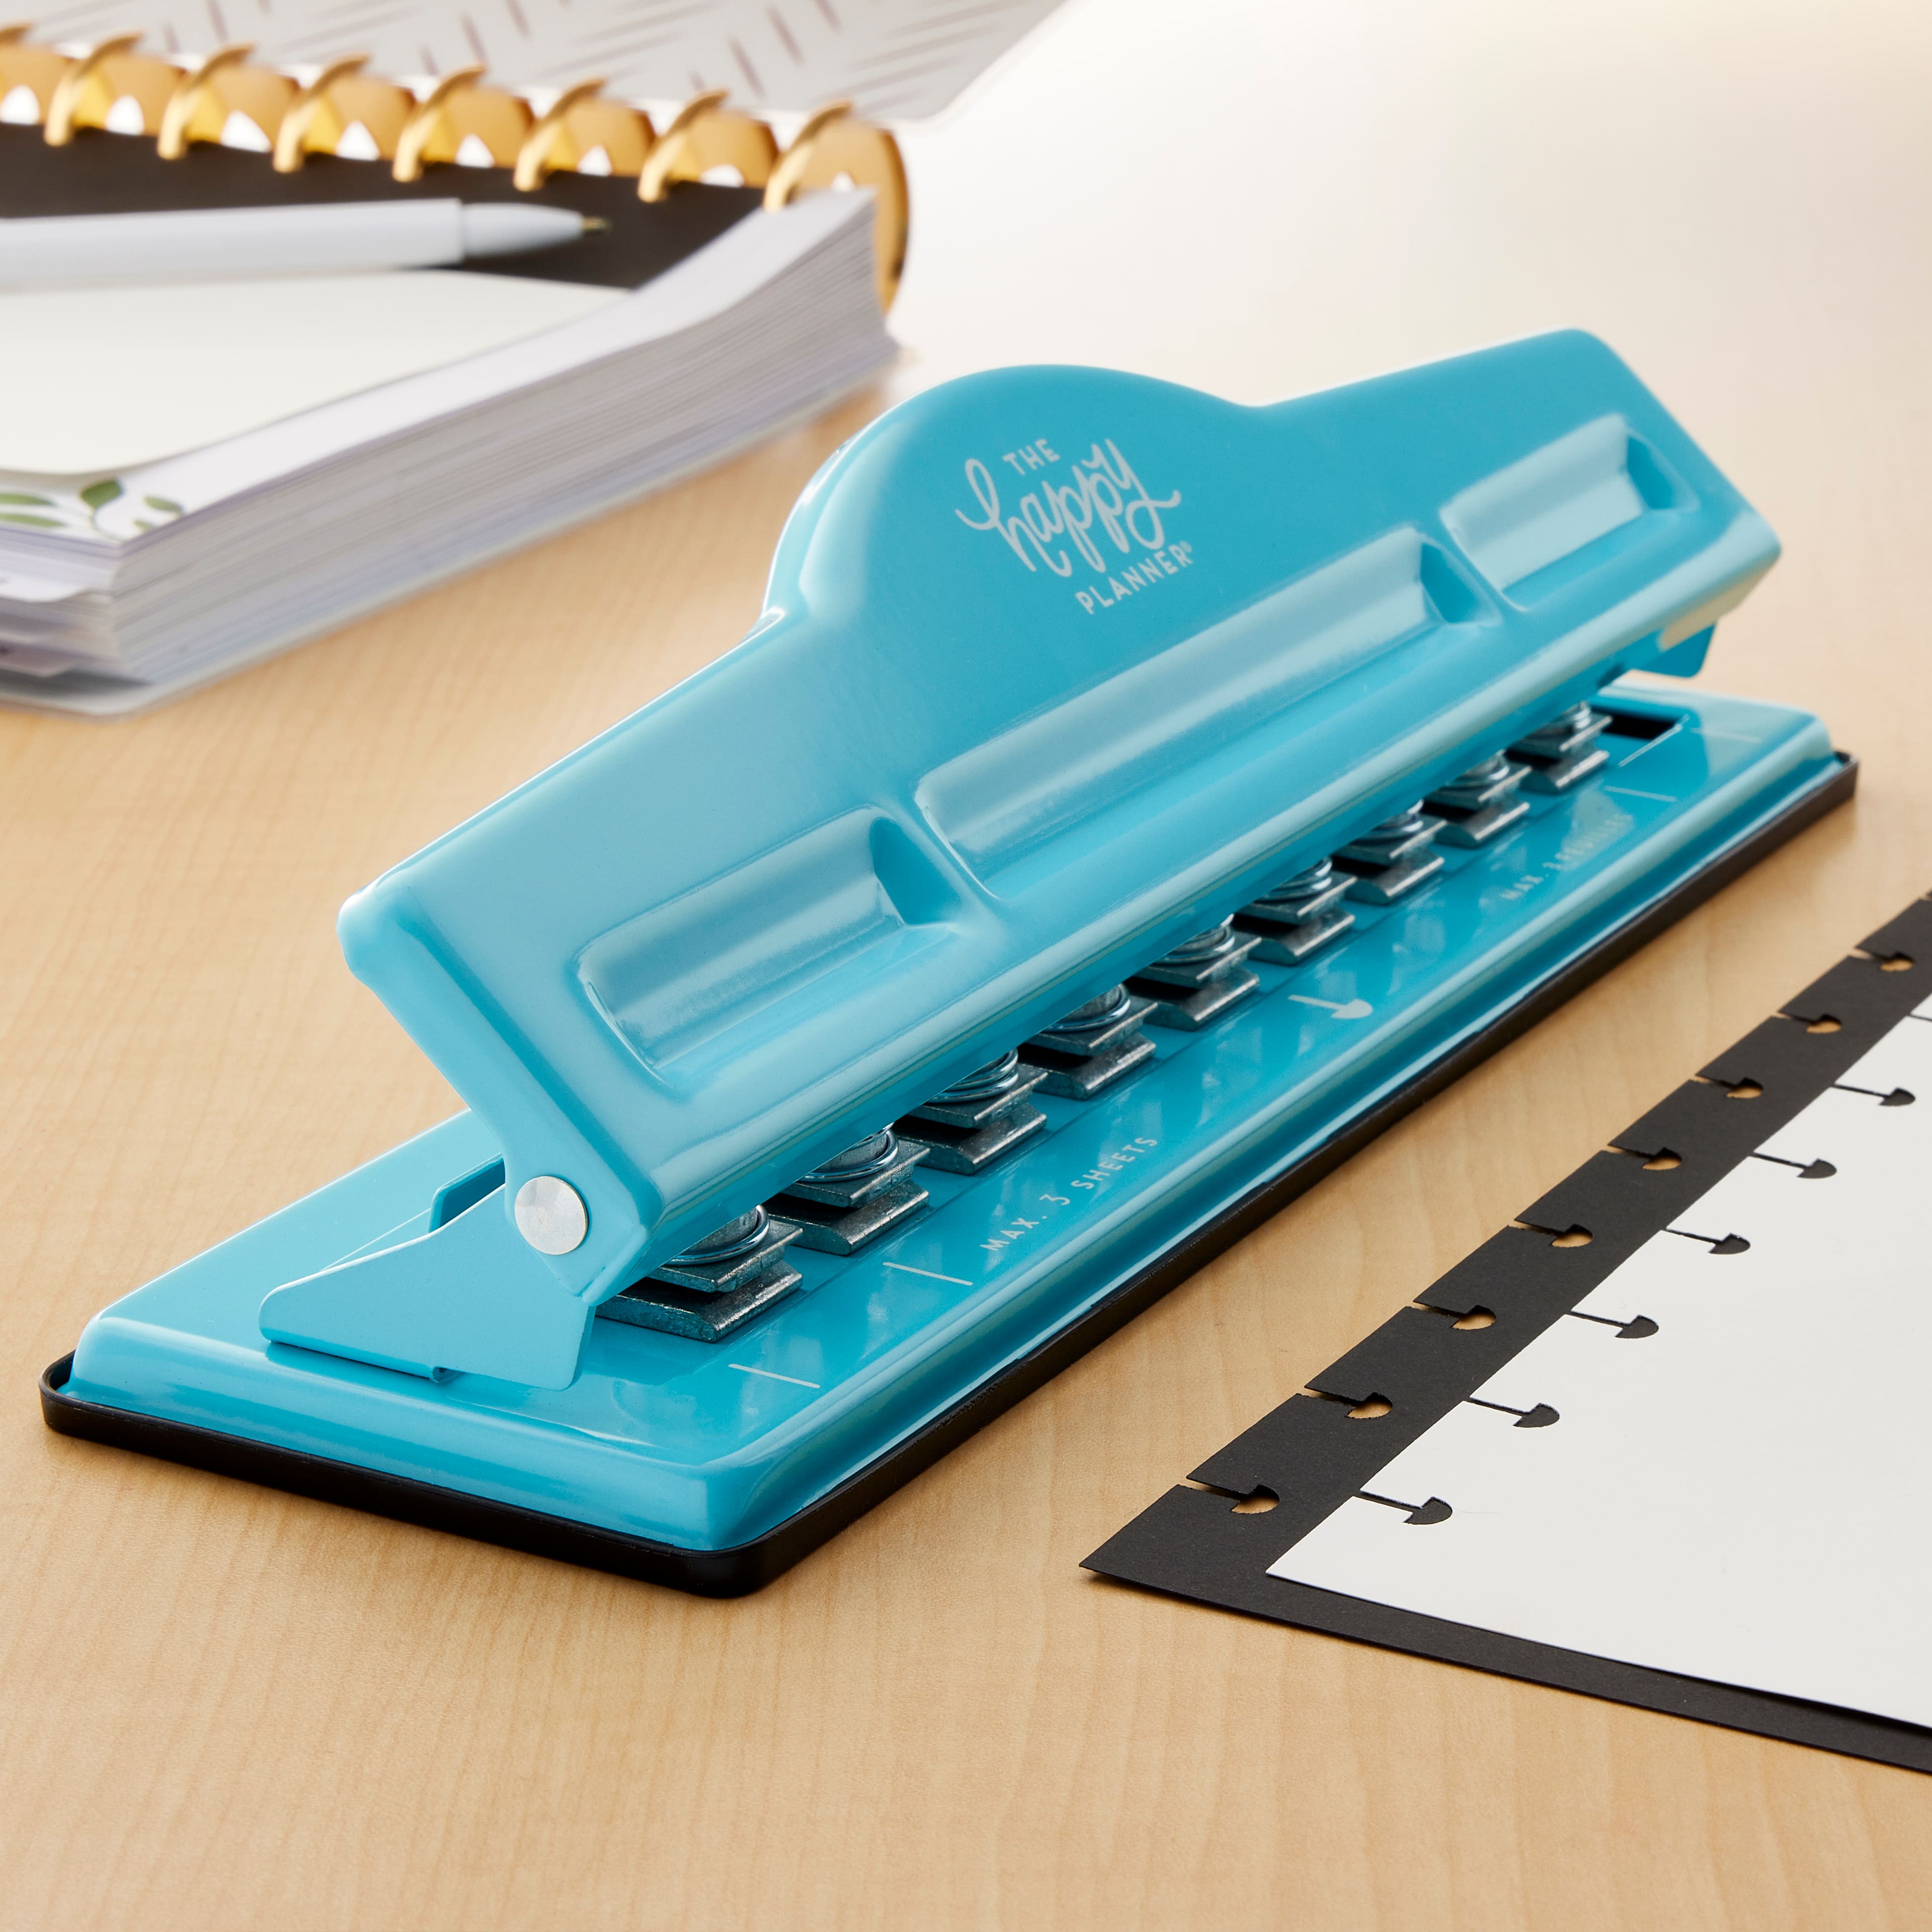 Create 365™ The Happy Planner™ Paper Punch